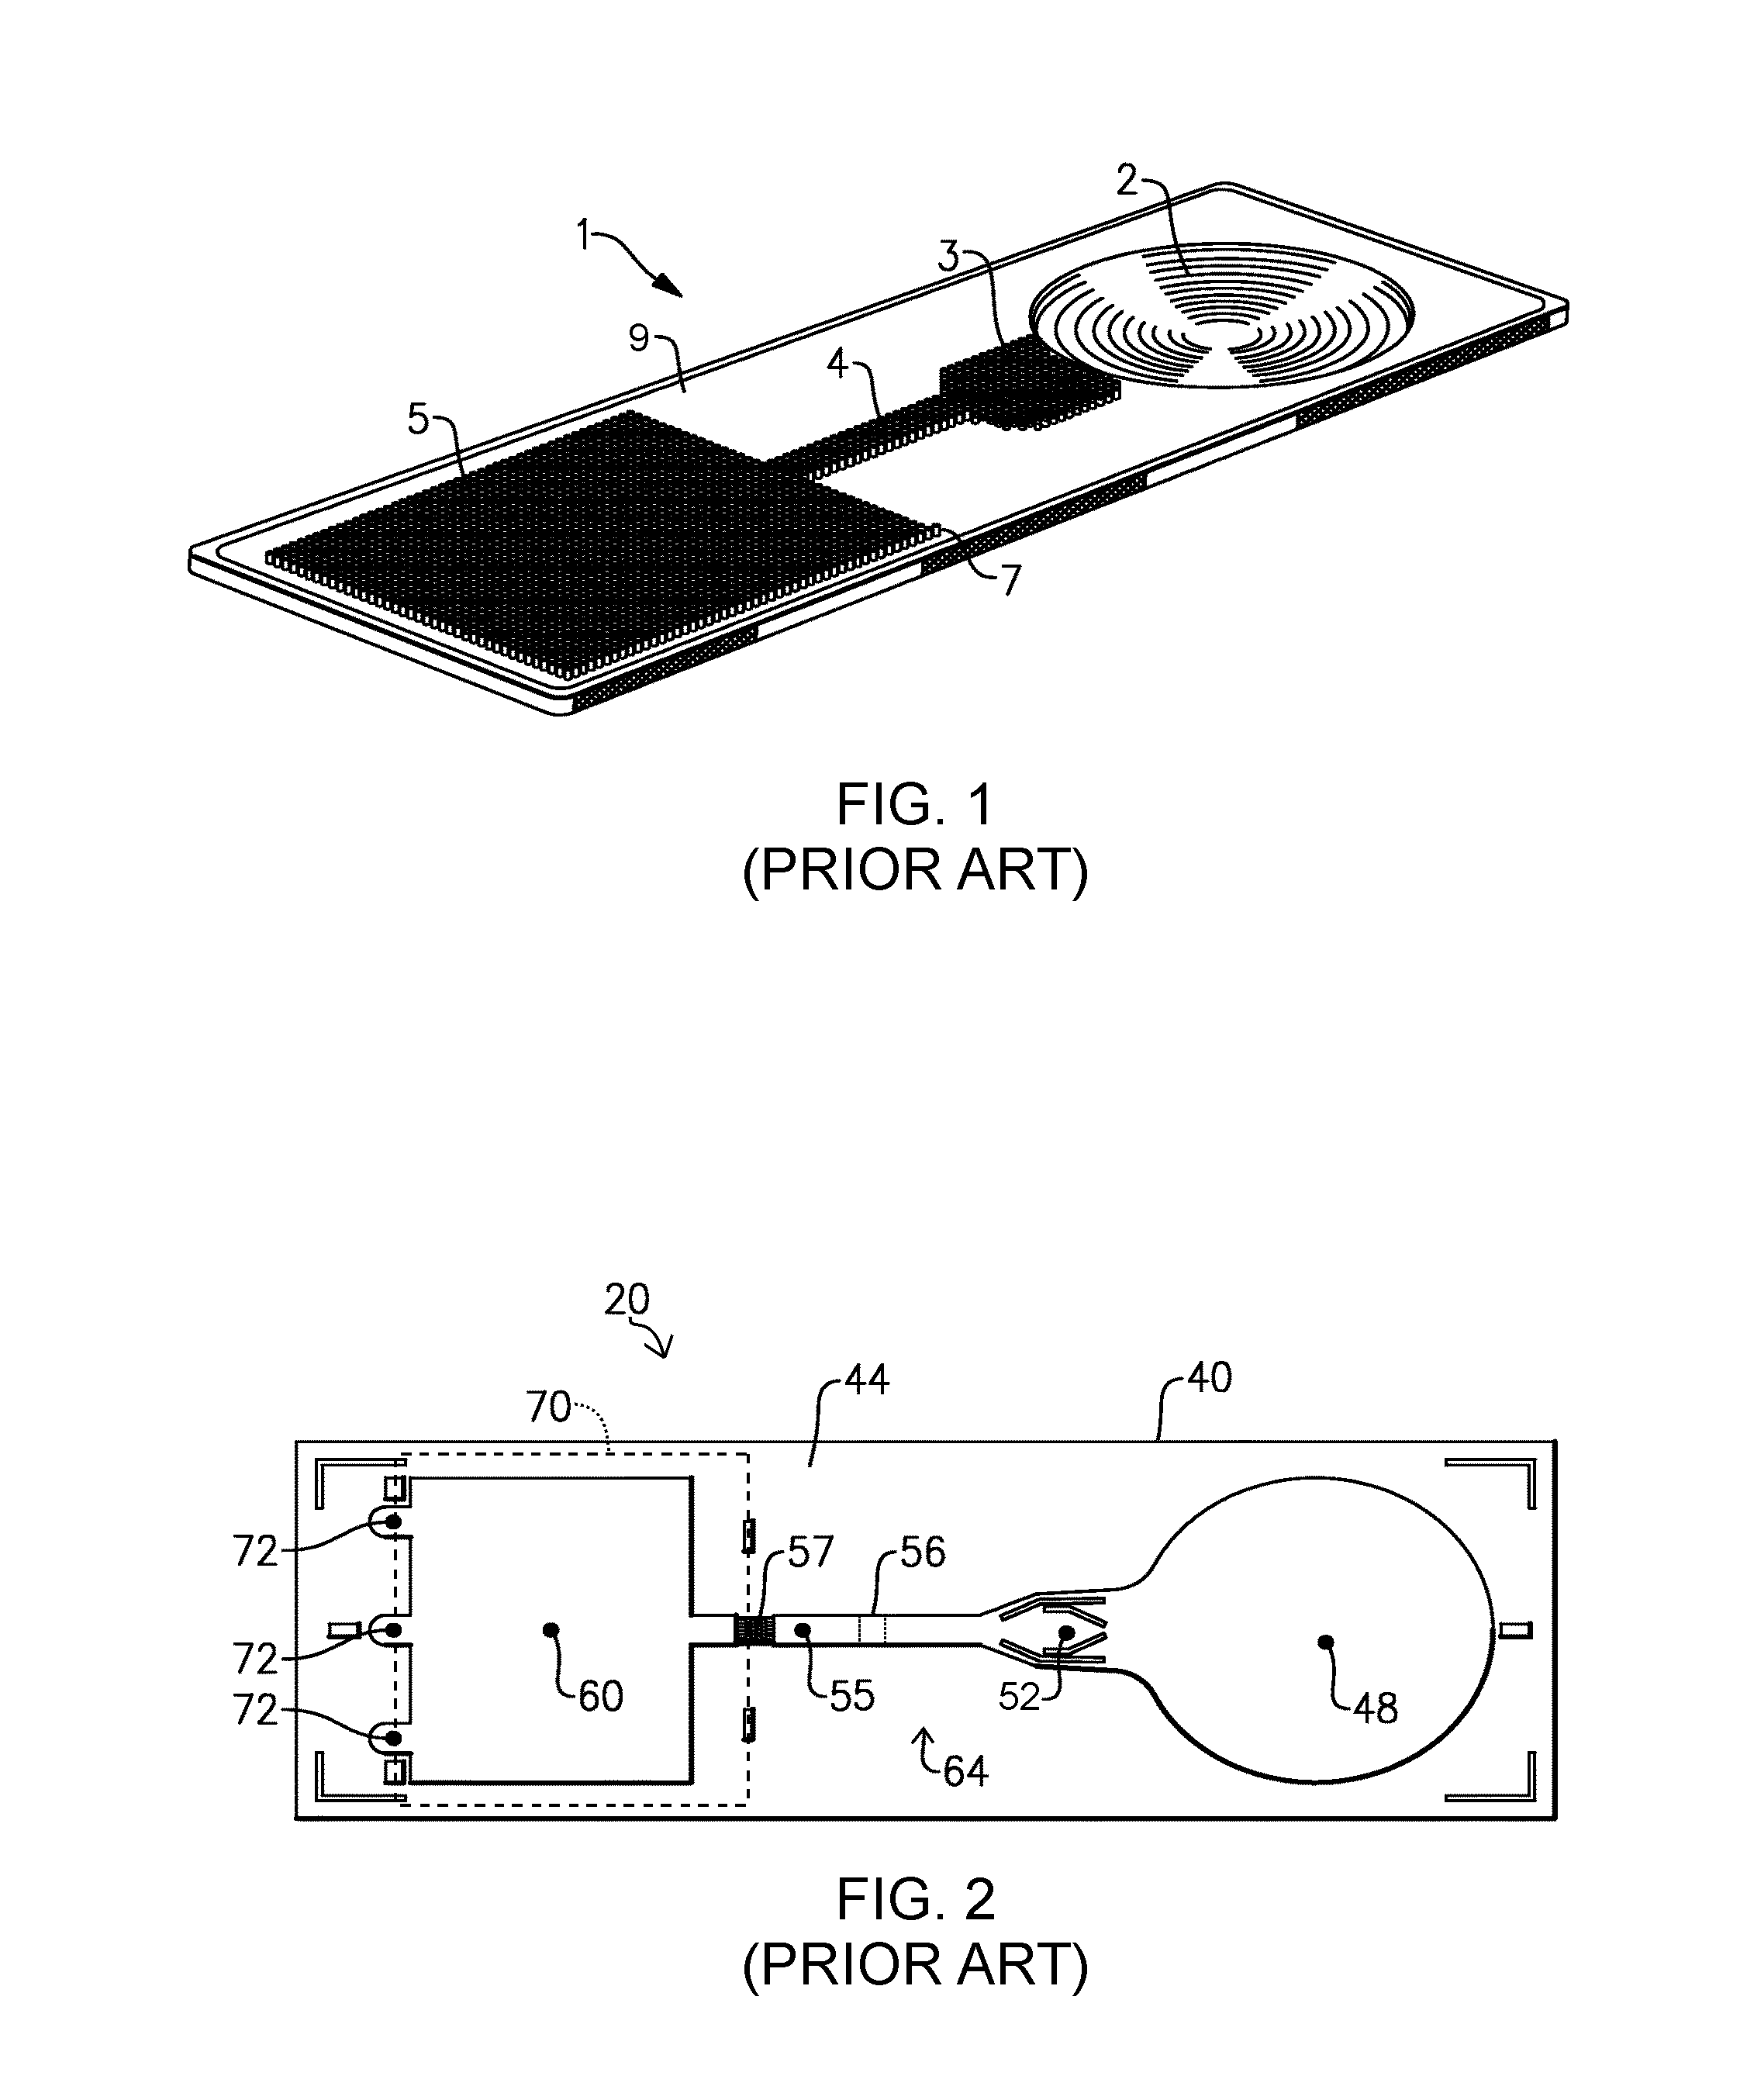 Lateral-flow assay device with filtration flow control